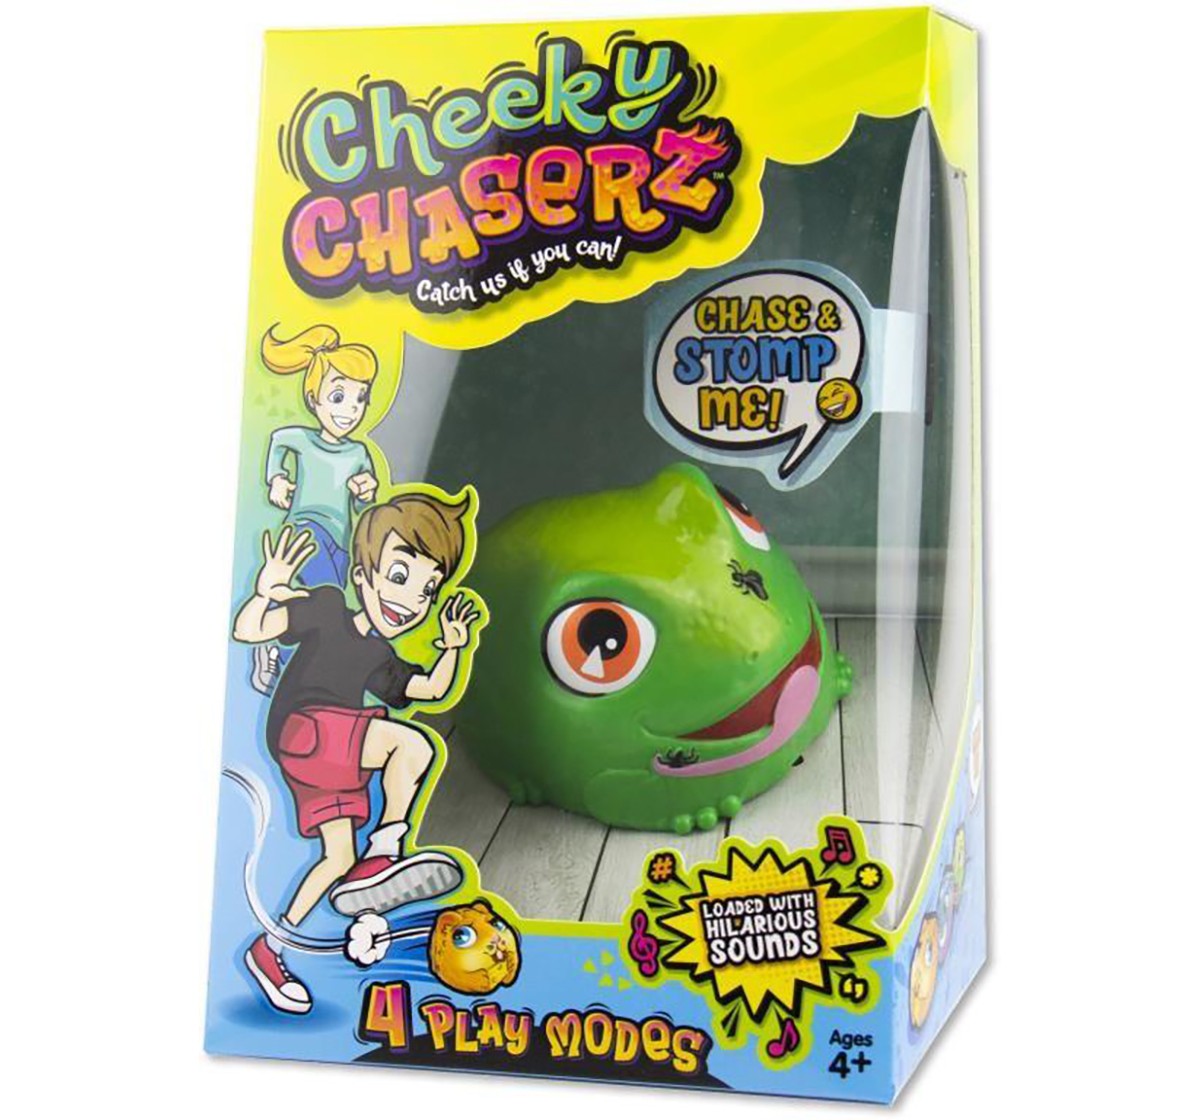 Cheeky Chaserz Frantic Frog for Kids age 5Y+ 